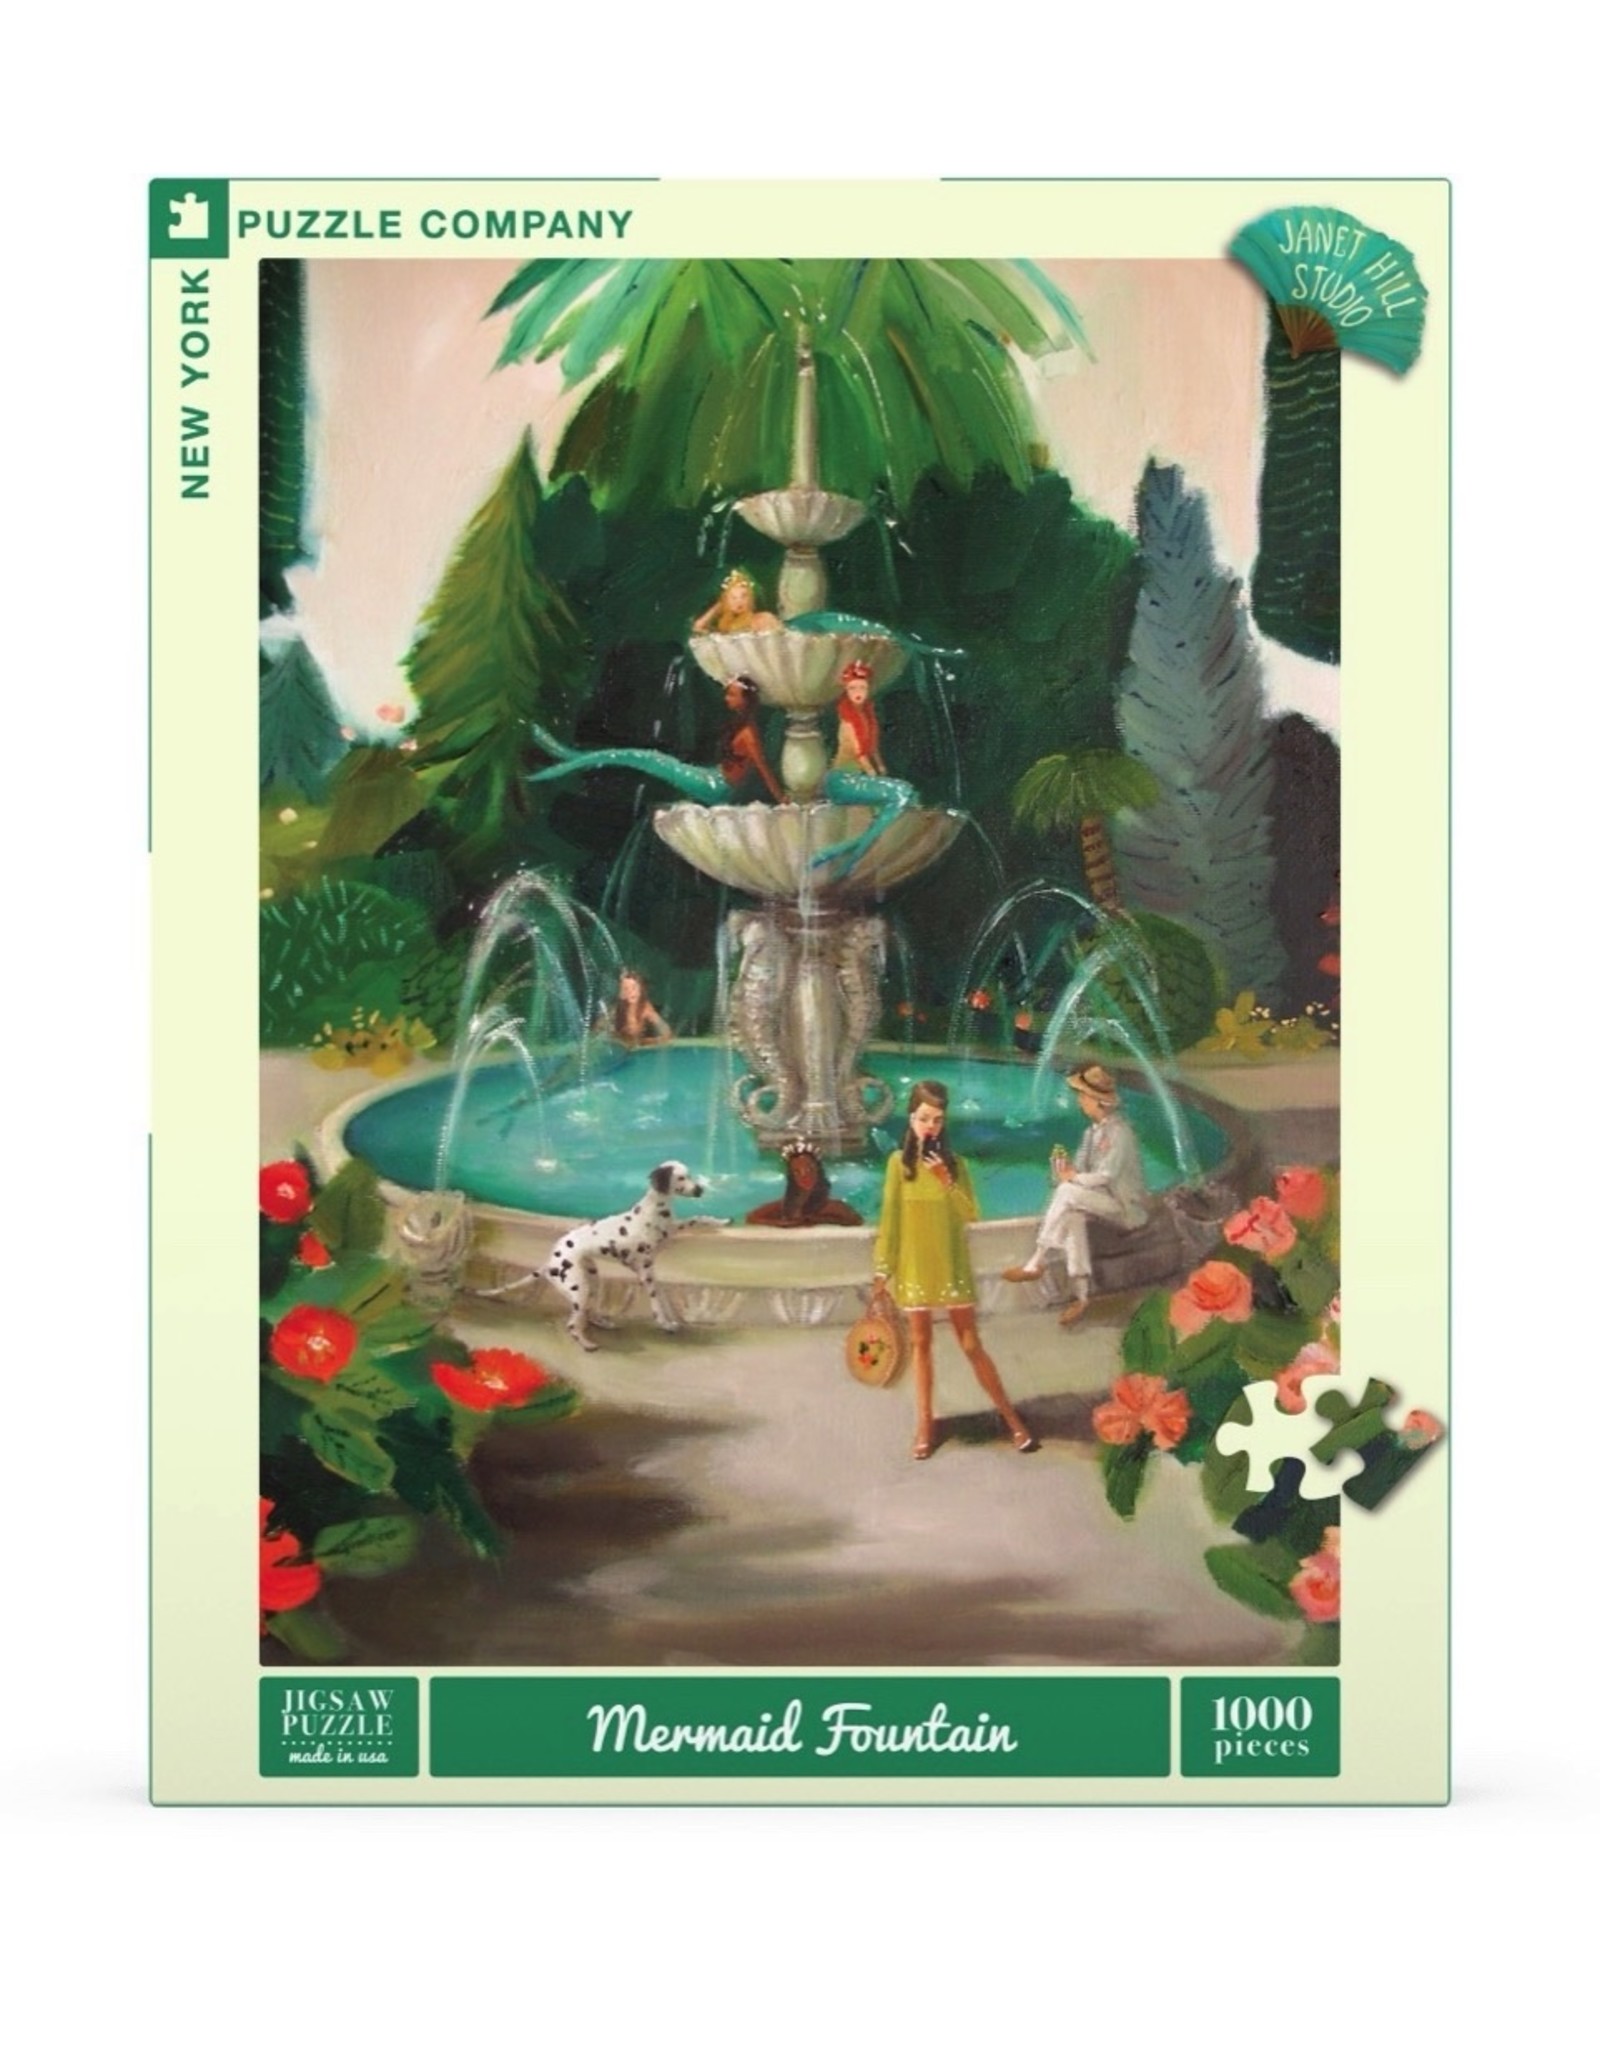 New York Puzzle Co Janet Hill Studio Mermaid Fountain Puzzle - 1000 Pieces